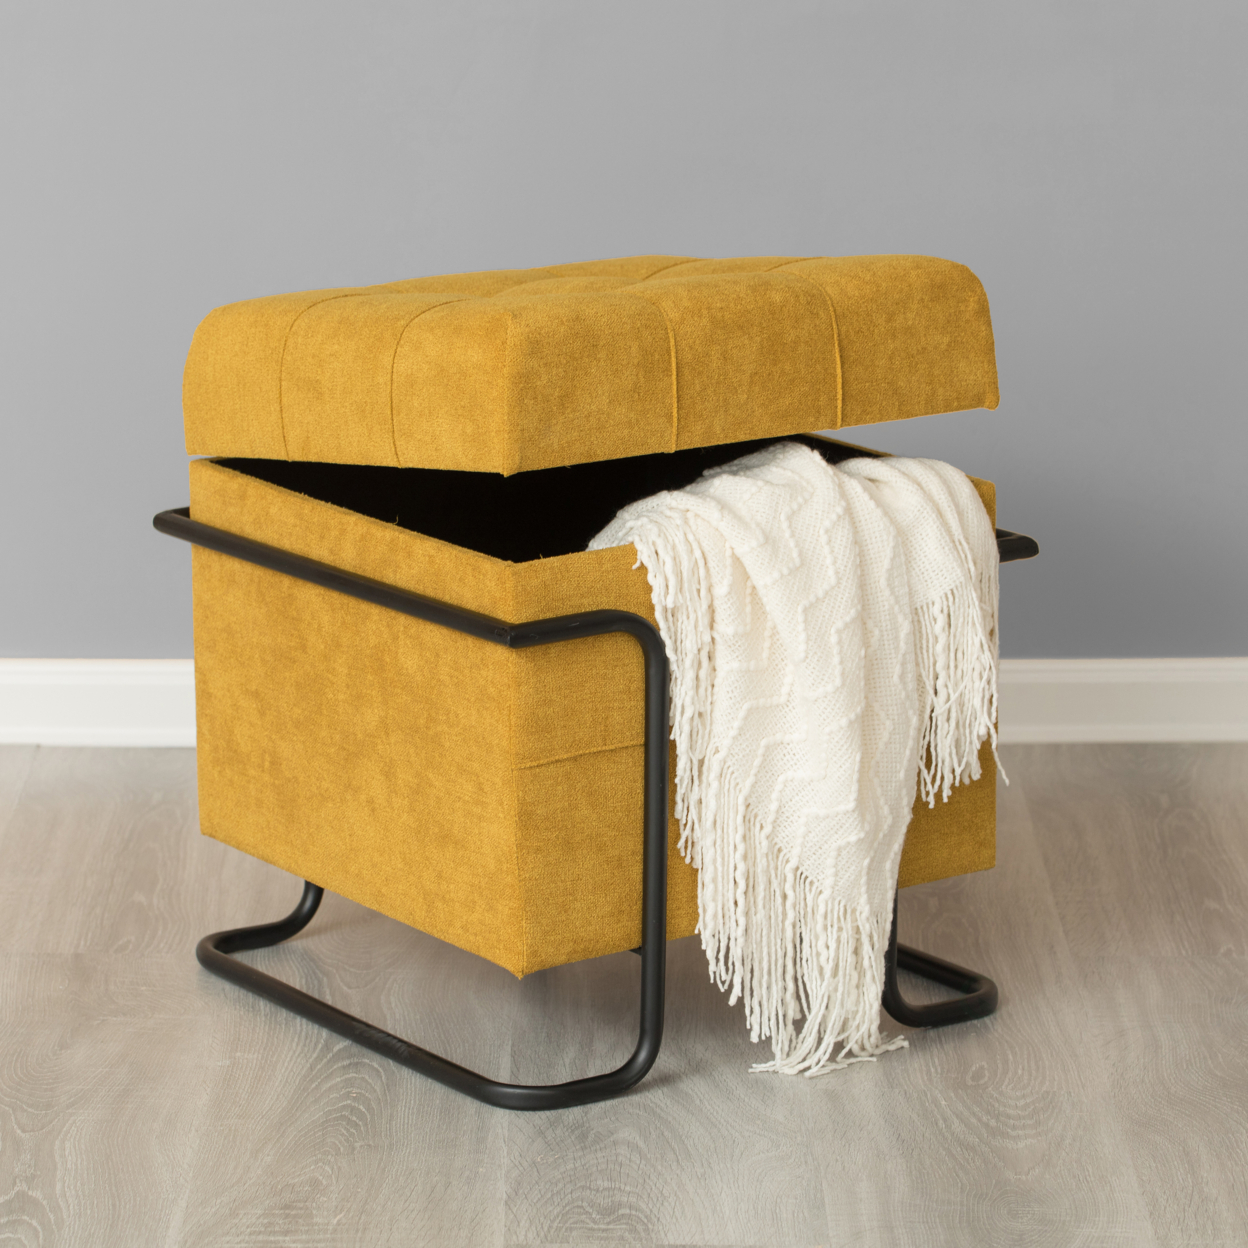 Square Fabric Storage Ottoman With Black Metal Frame - Yellow